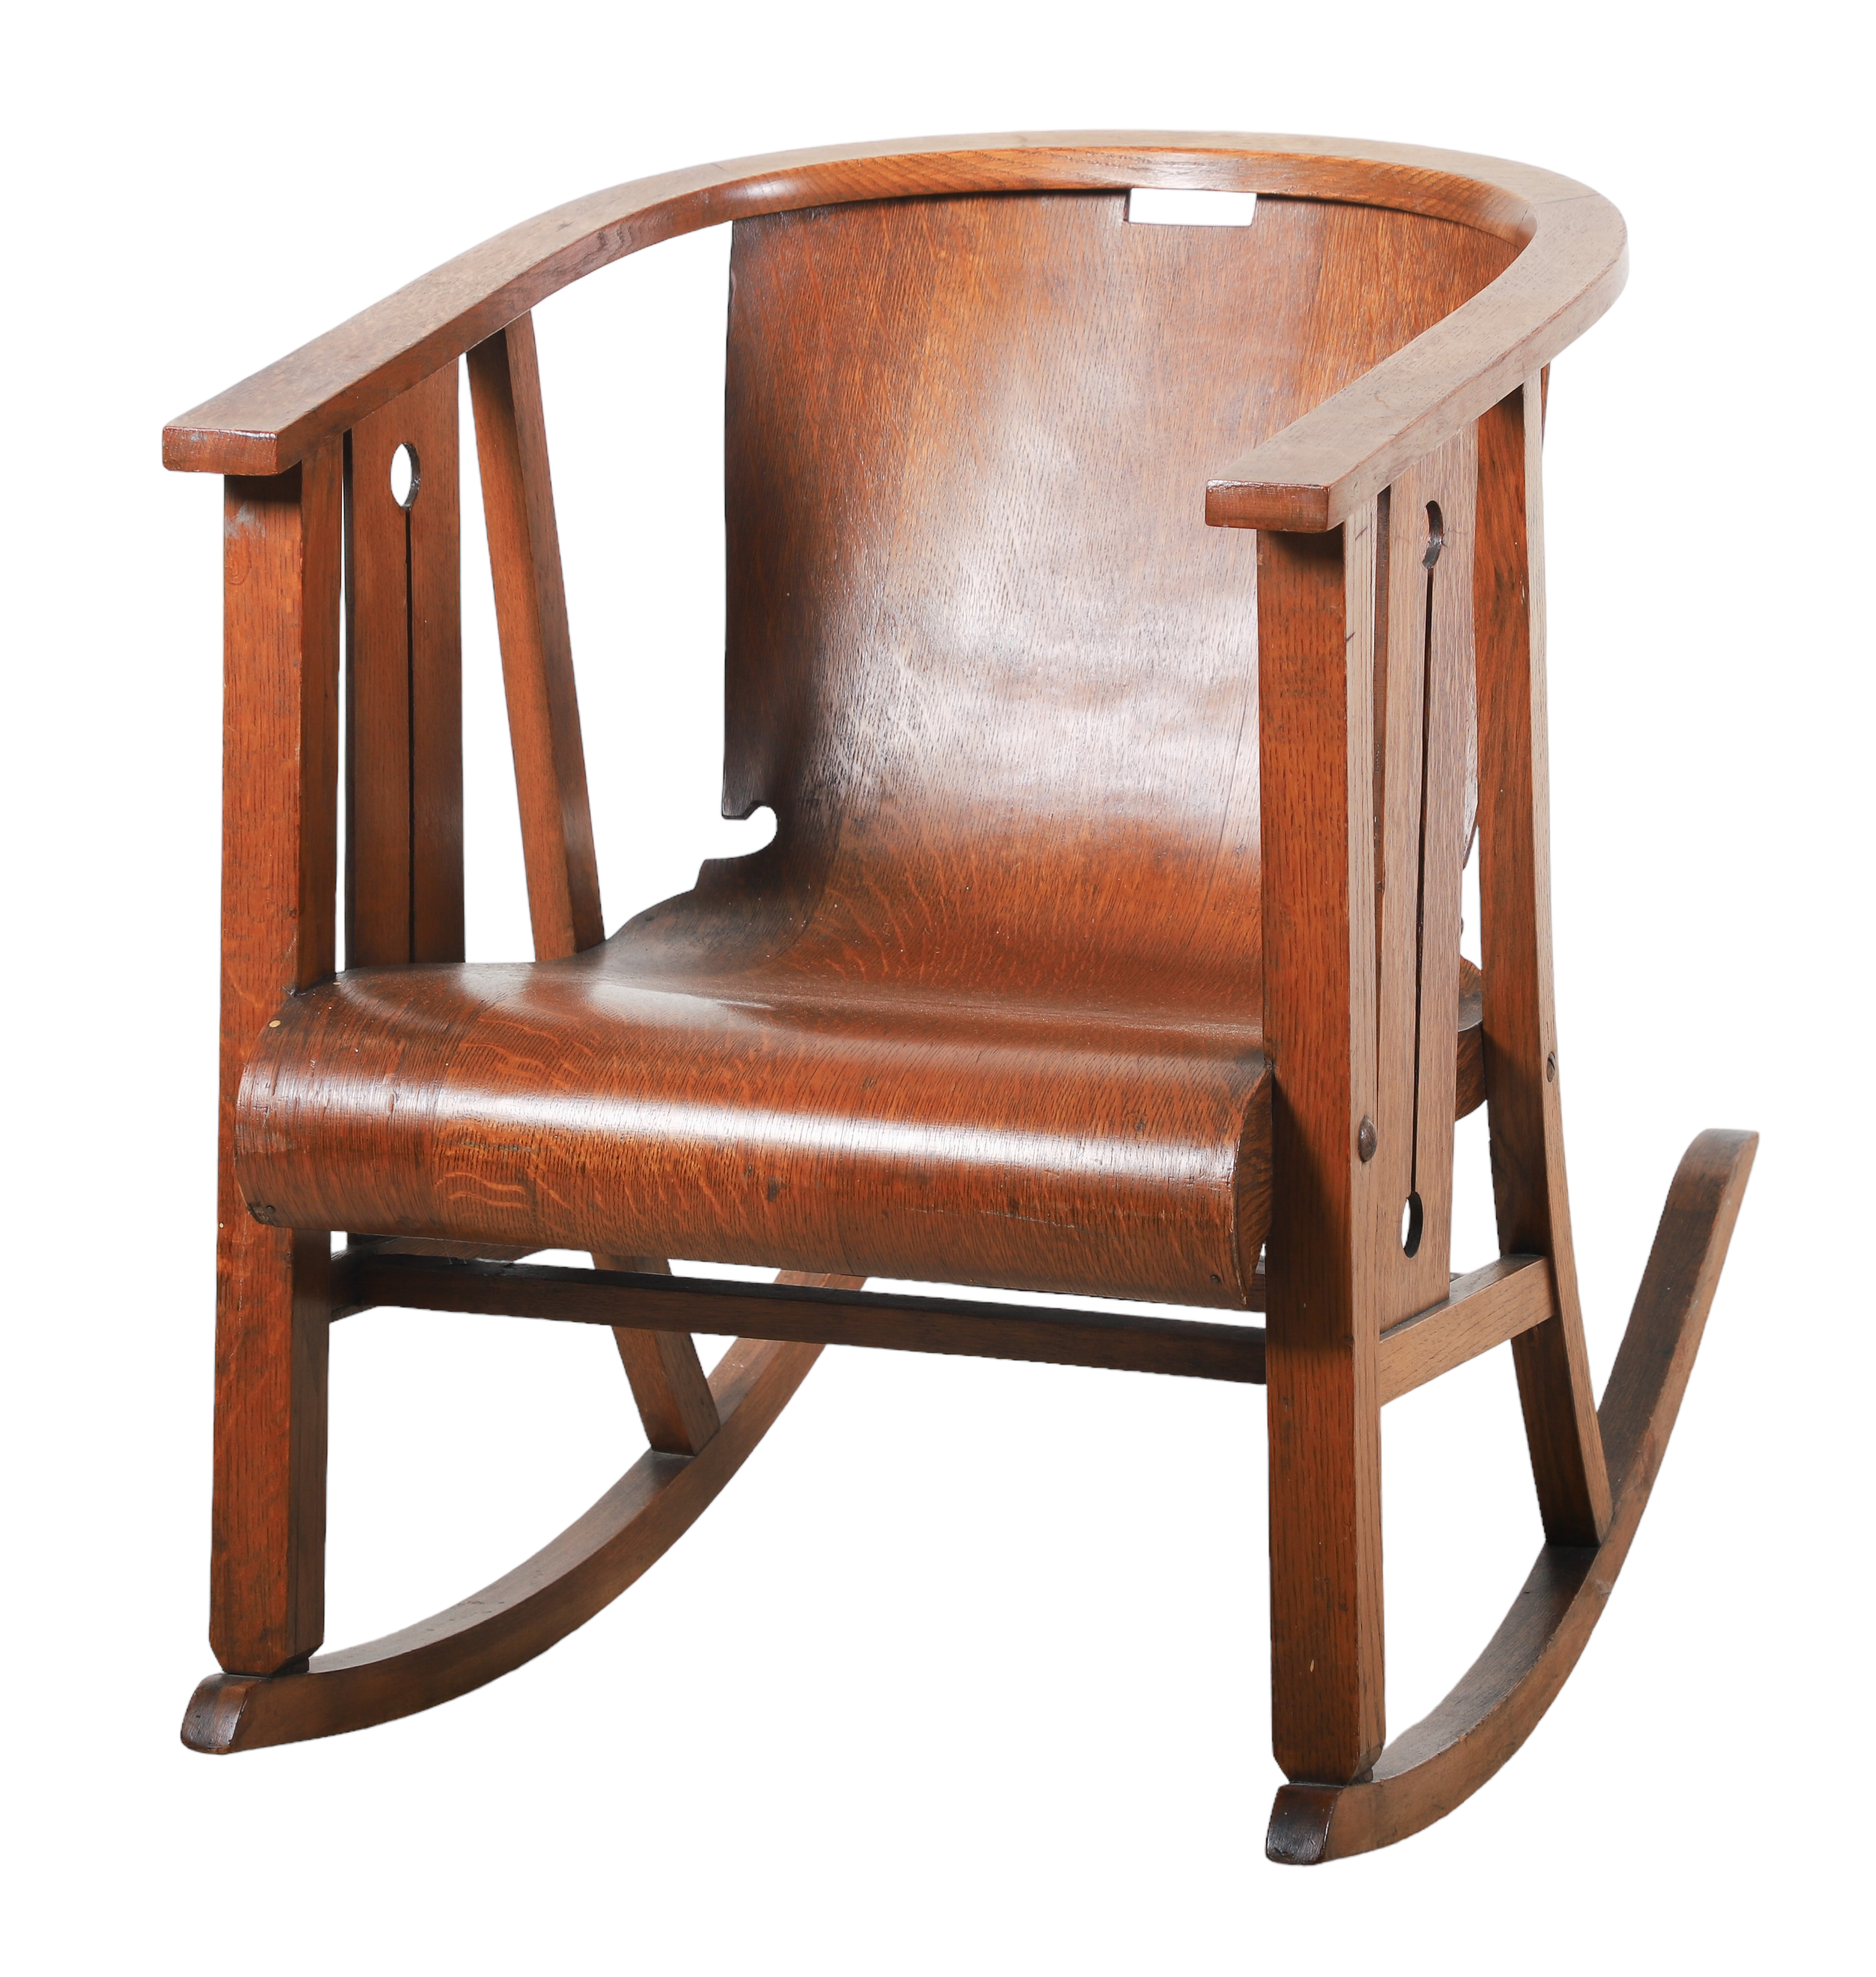 Oak Arts and Crafts rocking chair